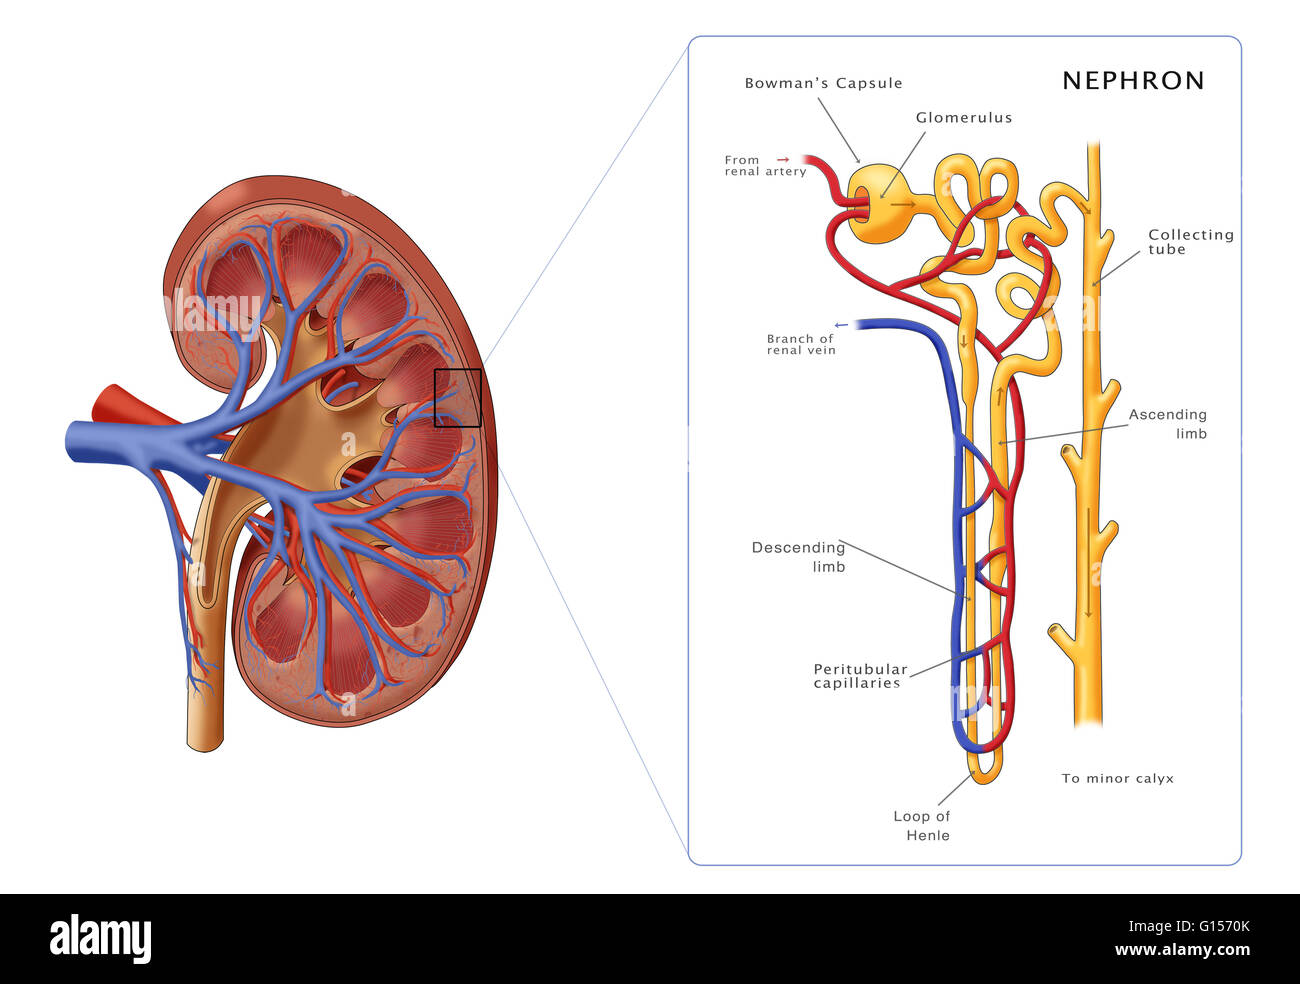 Illustration Of The Structure Of A Nephron (The Basic Structural And Functional  Unit Of The Kidney) Along Side A Cross Section Of A Kidney. Depicted In The  Nephron Are The Glomerulus, Bowman'S